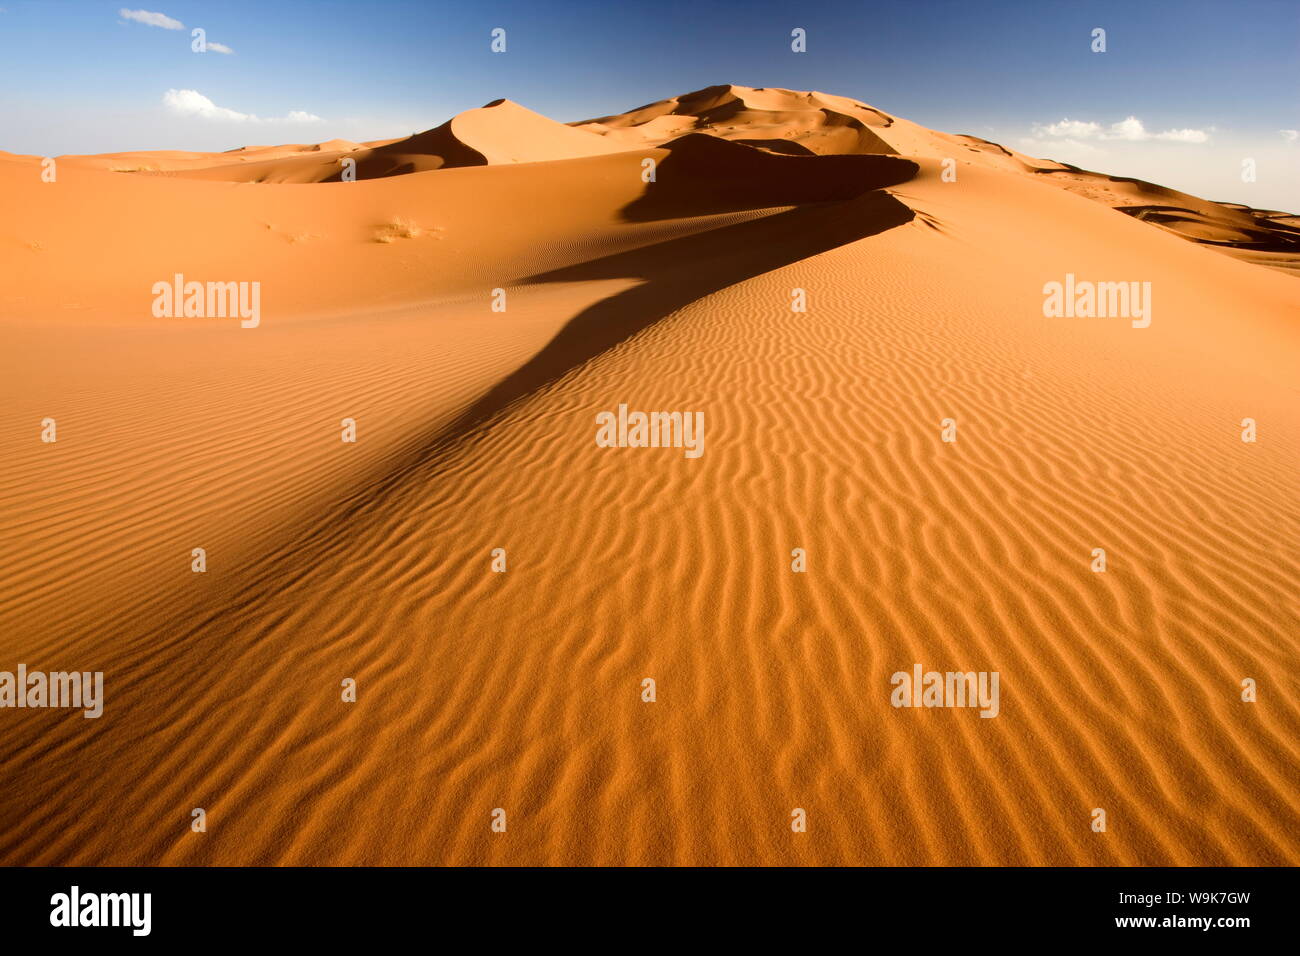 Rolling orange sand dunes and sand ripples in the Erg Chebbi sand sea near Merzouga, Morocco, North Africa, Africa Stock Photo